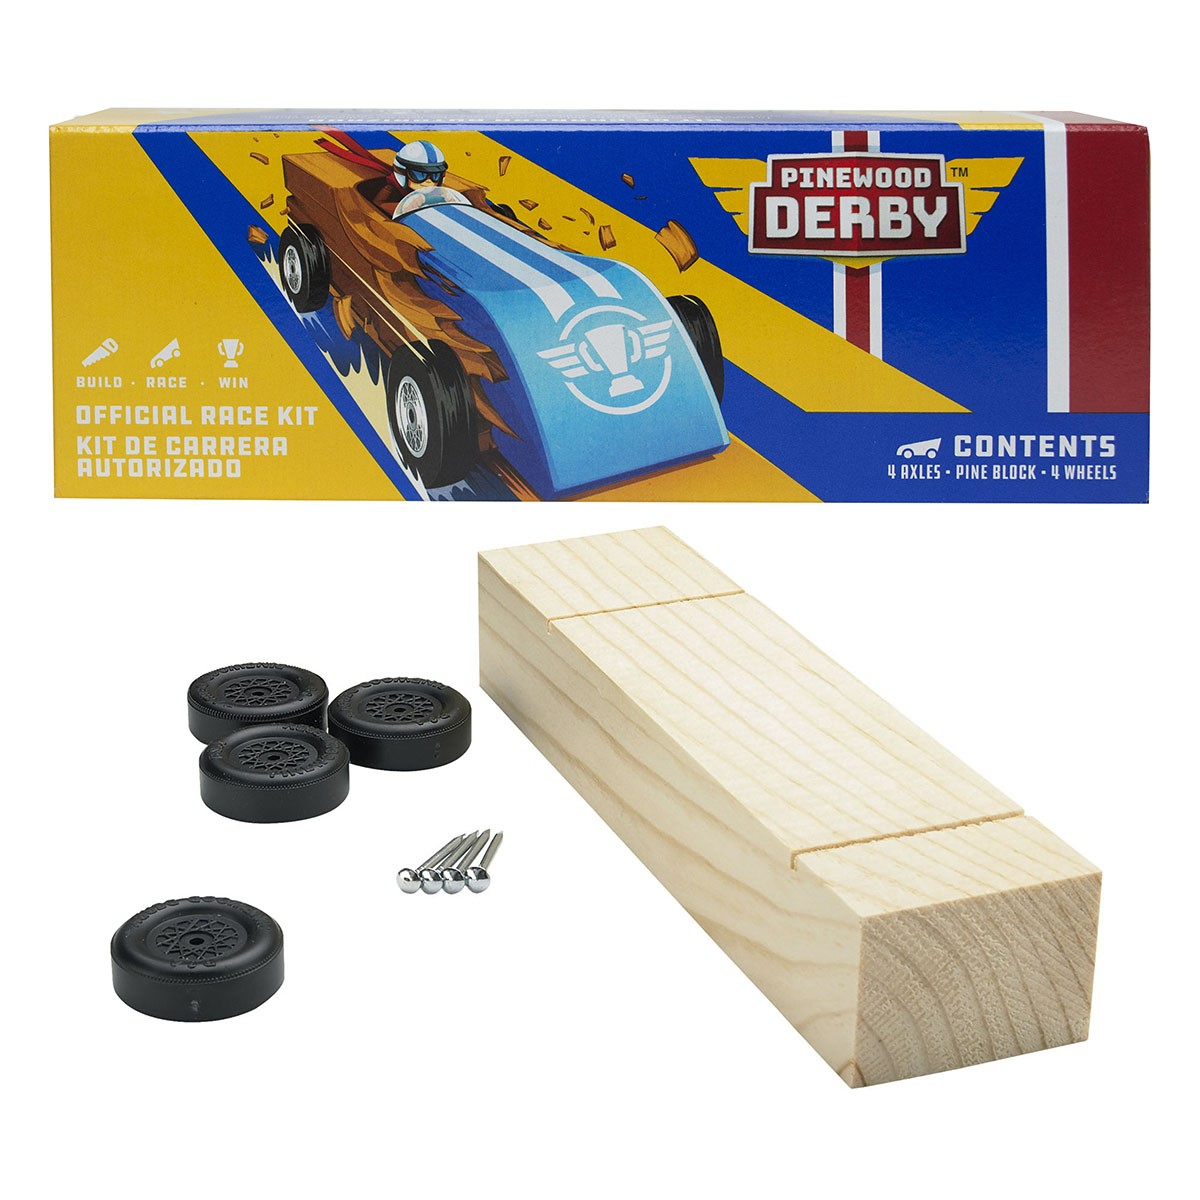 Super 88 Tractor Takes Pinewood Racing To A New Level Pinewood Derby Pre-cut 